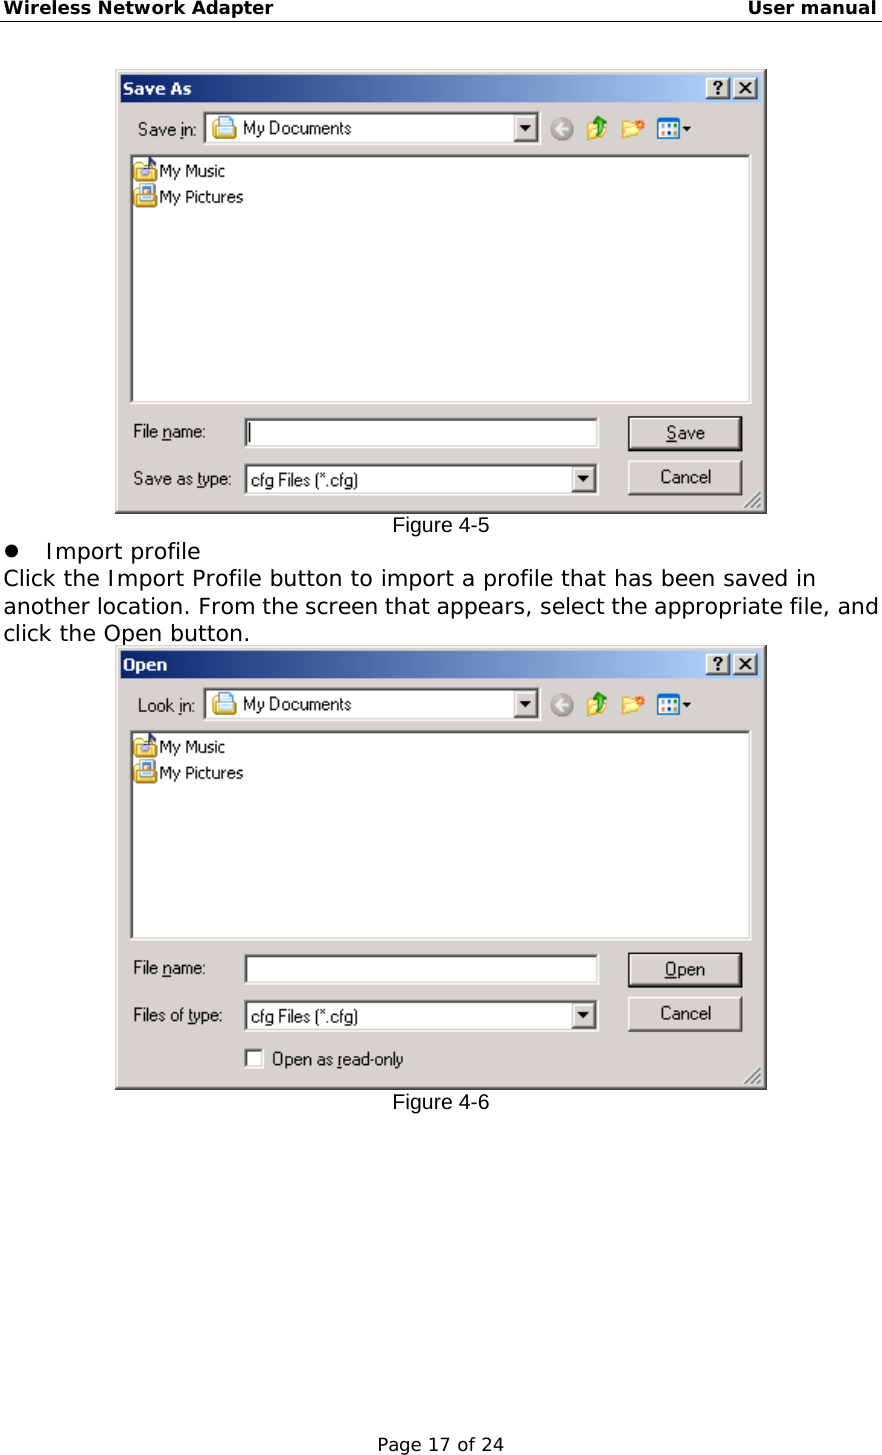 Wireless Network Adapter                                                    User manual Page 17 of 24  Figure 4-5   Import profile Click the Import Profile button to import a profile that has been saved in another location. From the screen that appears, select the appropriate file, and click the Open button.  Figure 4-6 